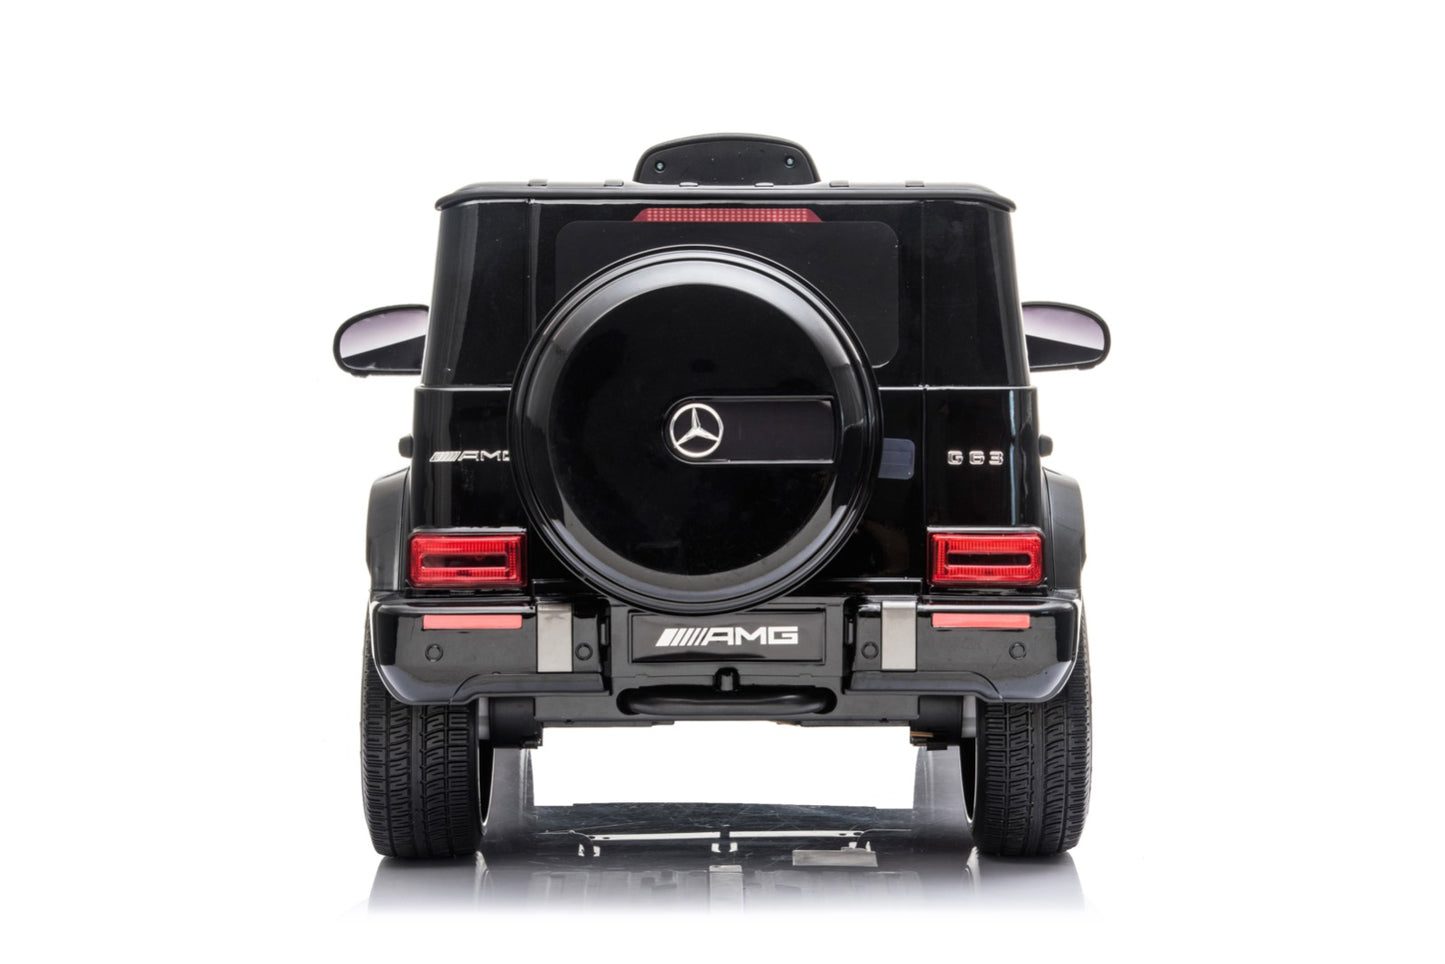 Mercedes G63 AMG 12V 1 Seat Kids Ride On Car with Remote Control